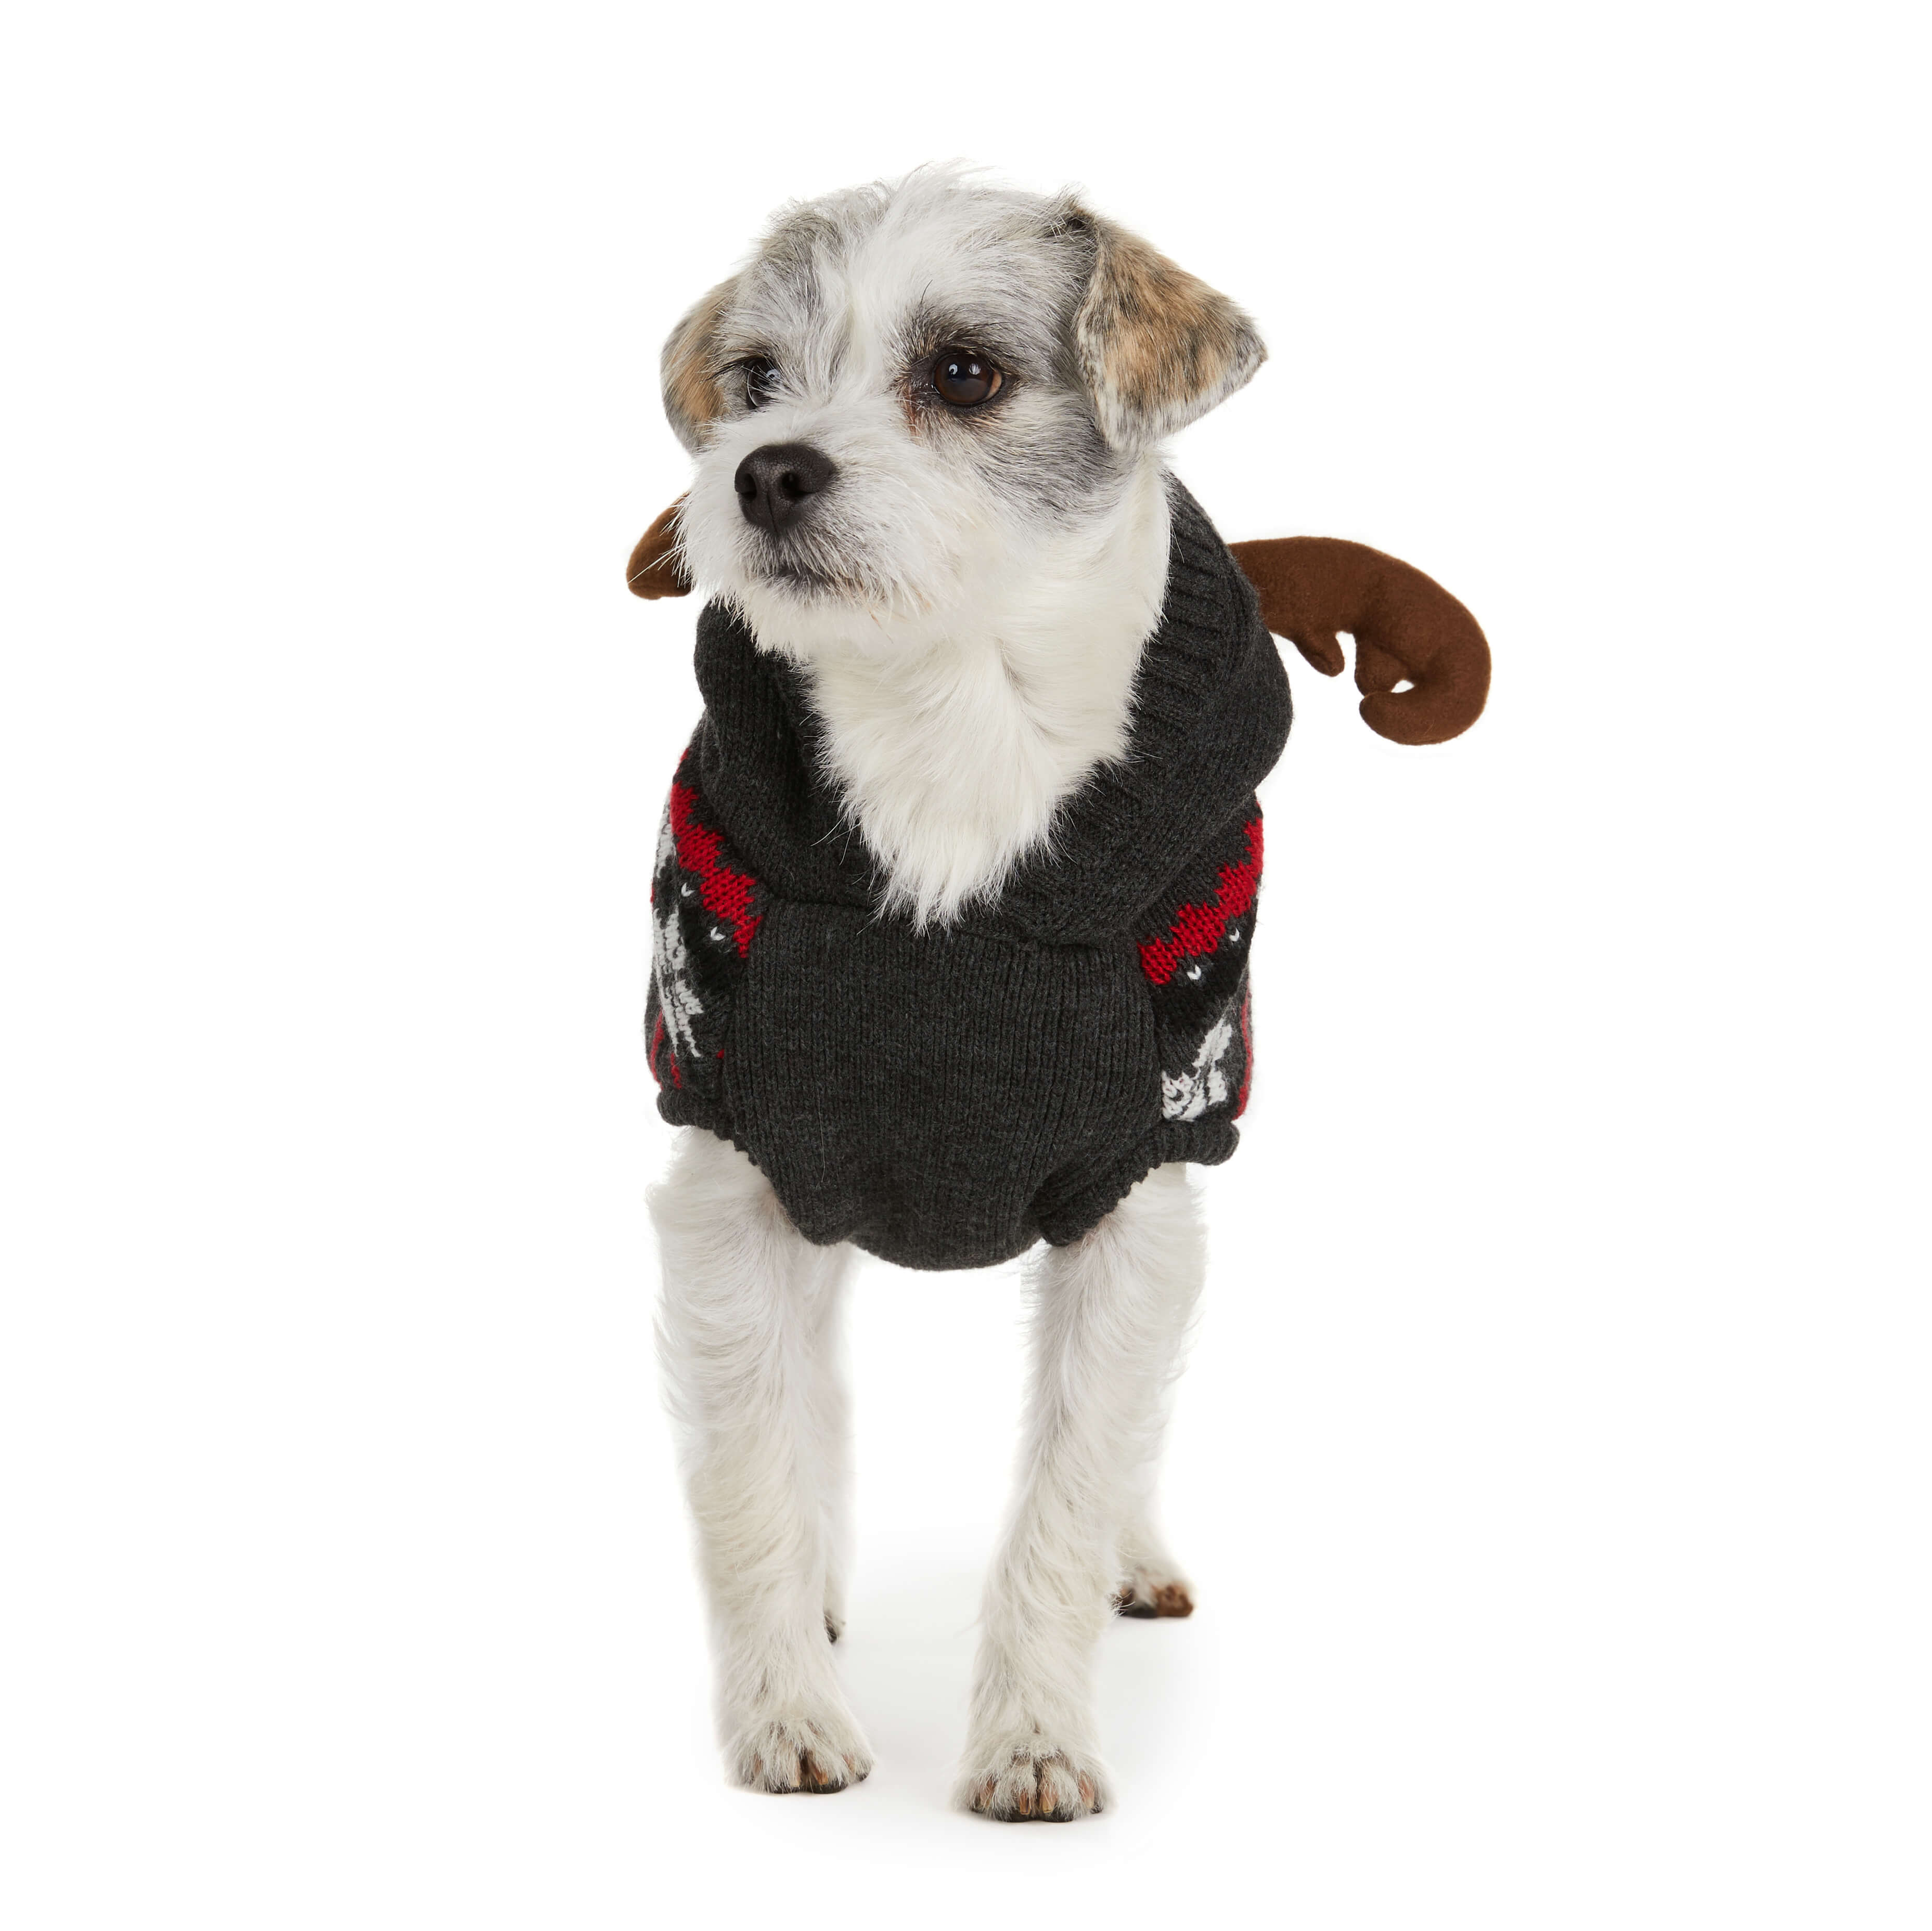 Dog wearing festive antler sweater. Front view